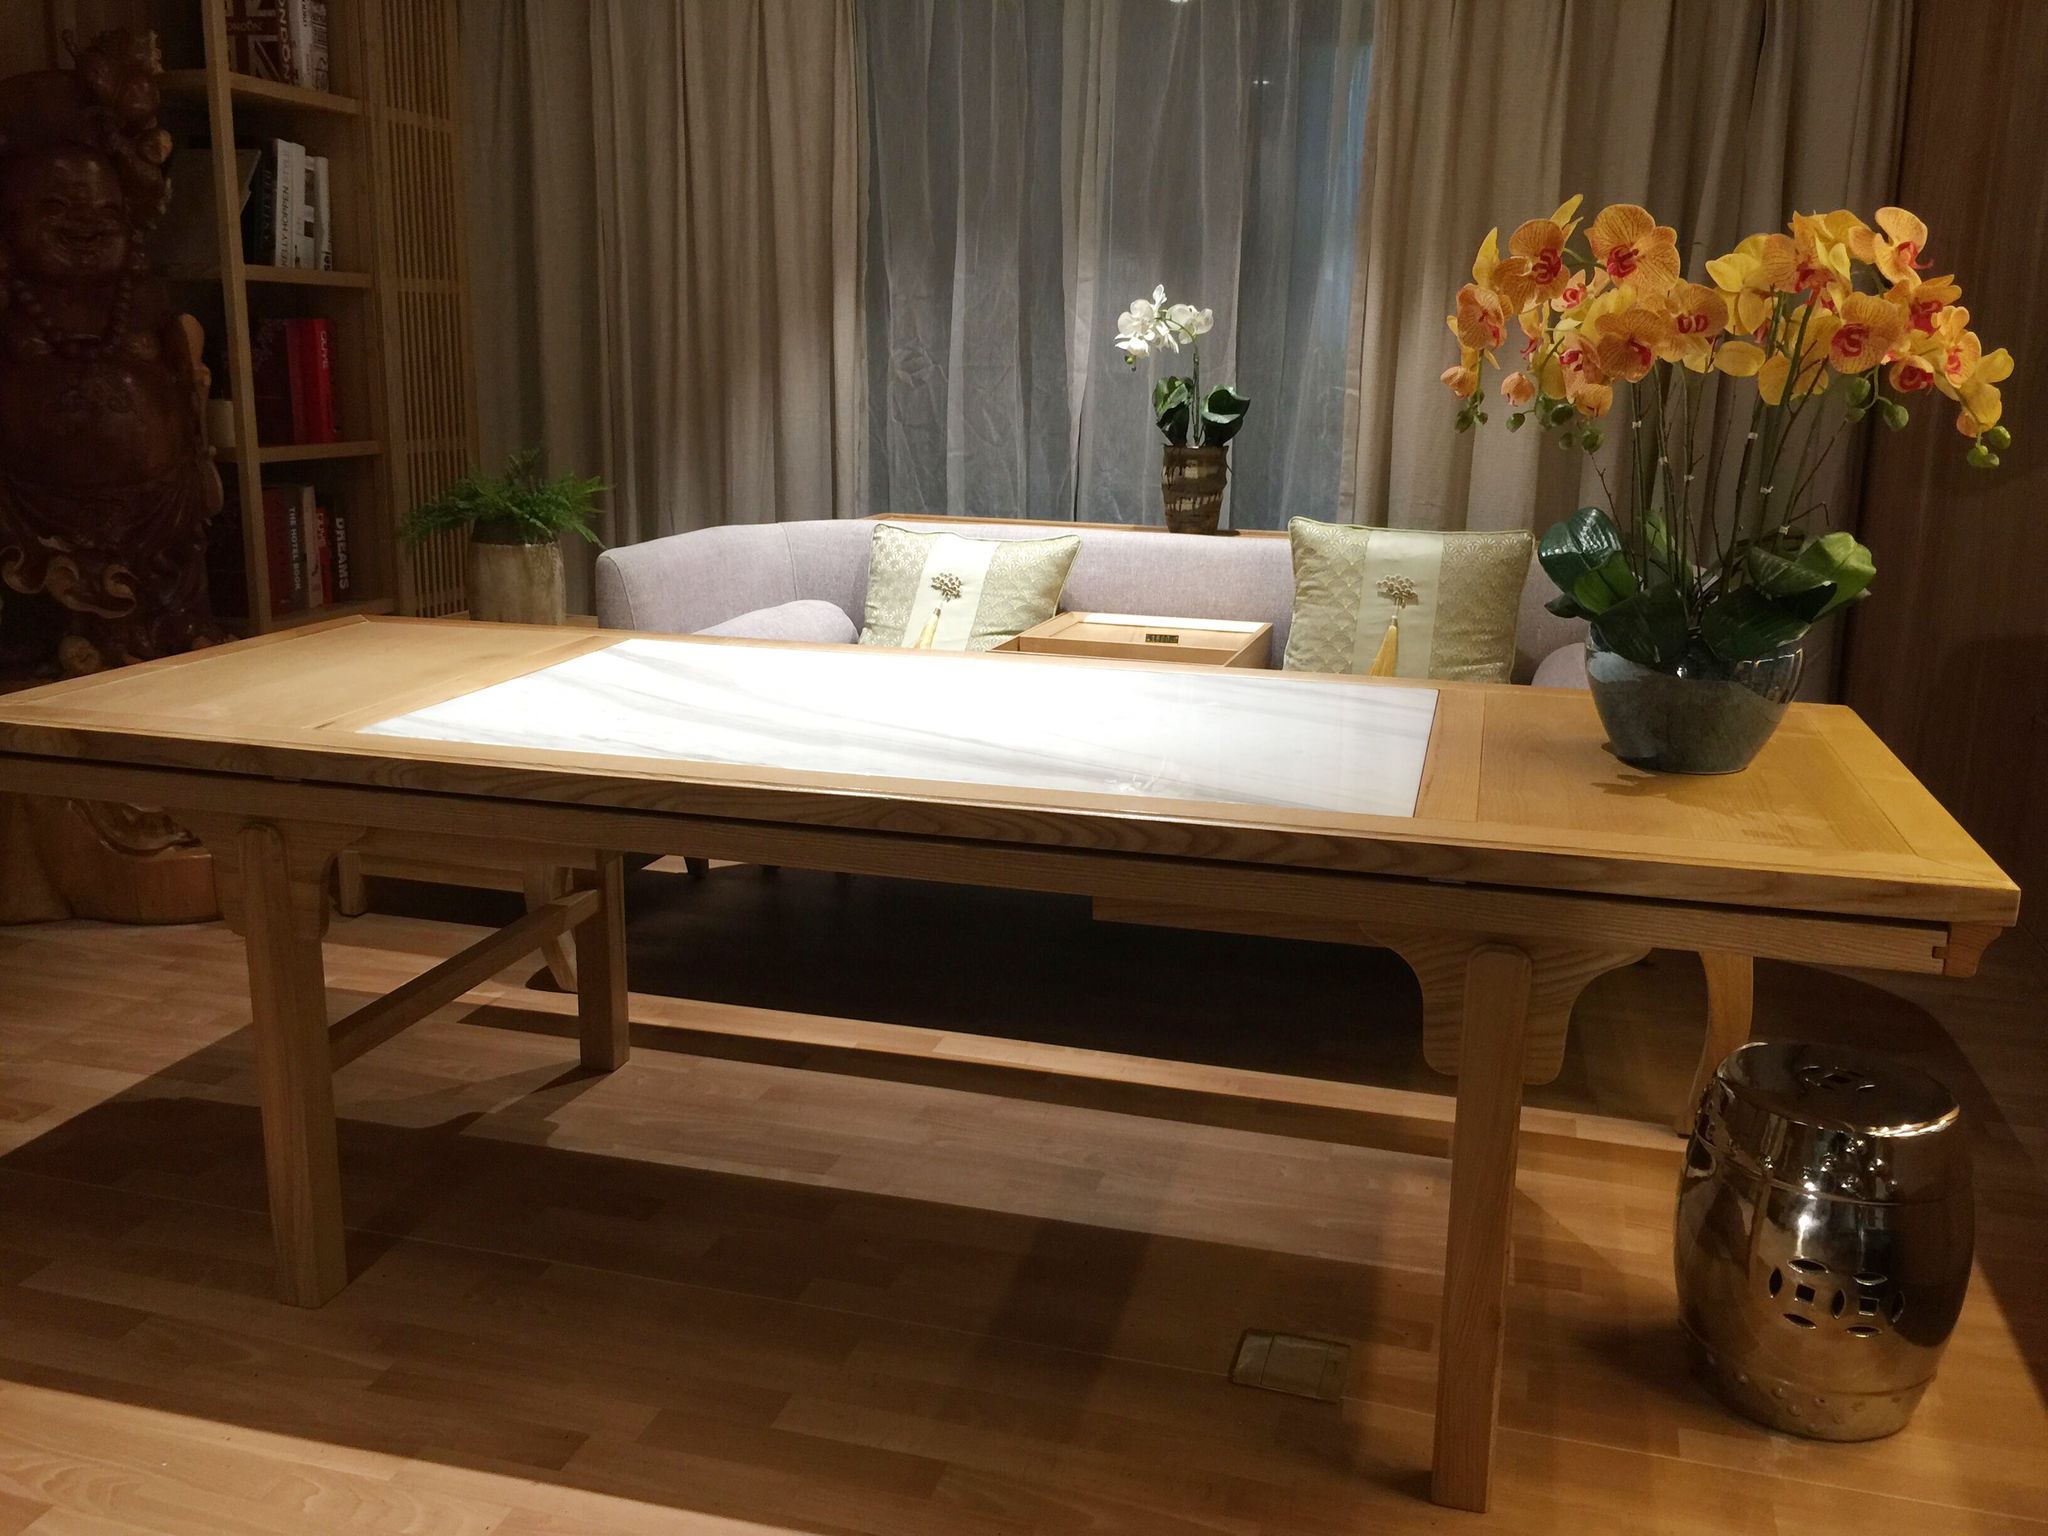 Multi purpose table from traditional Chinese craft